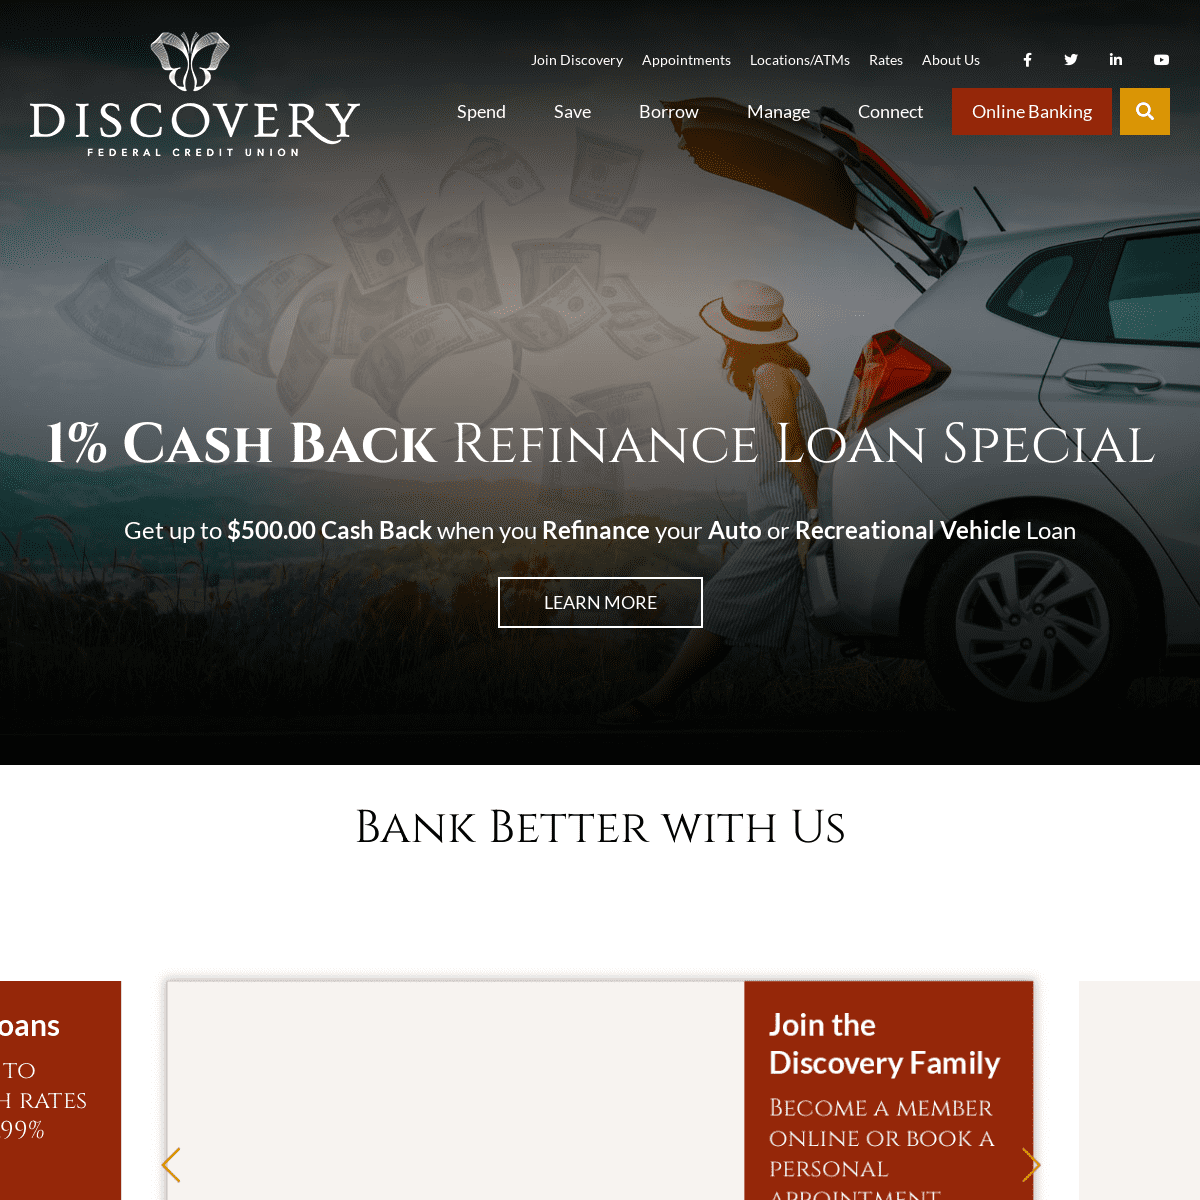 A complete backup of https://discoveryfcu.org